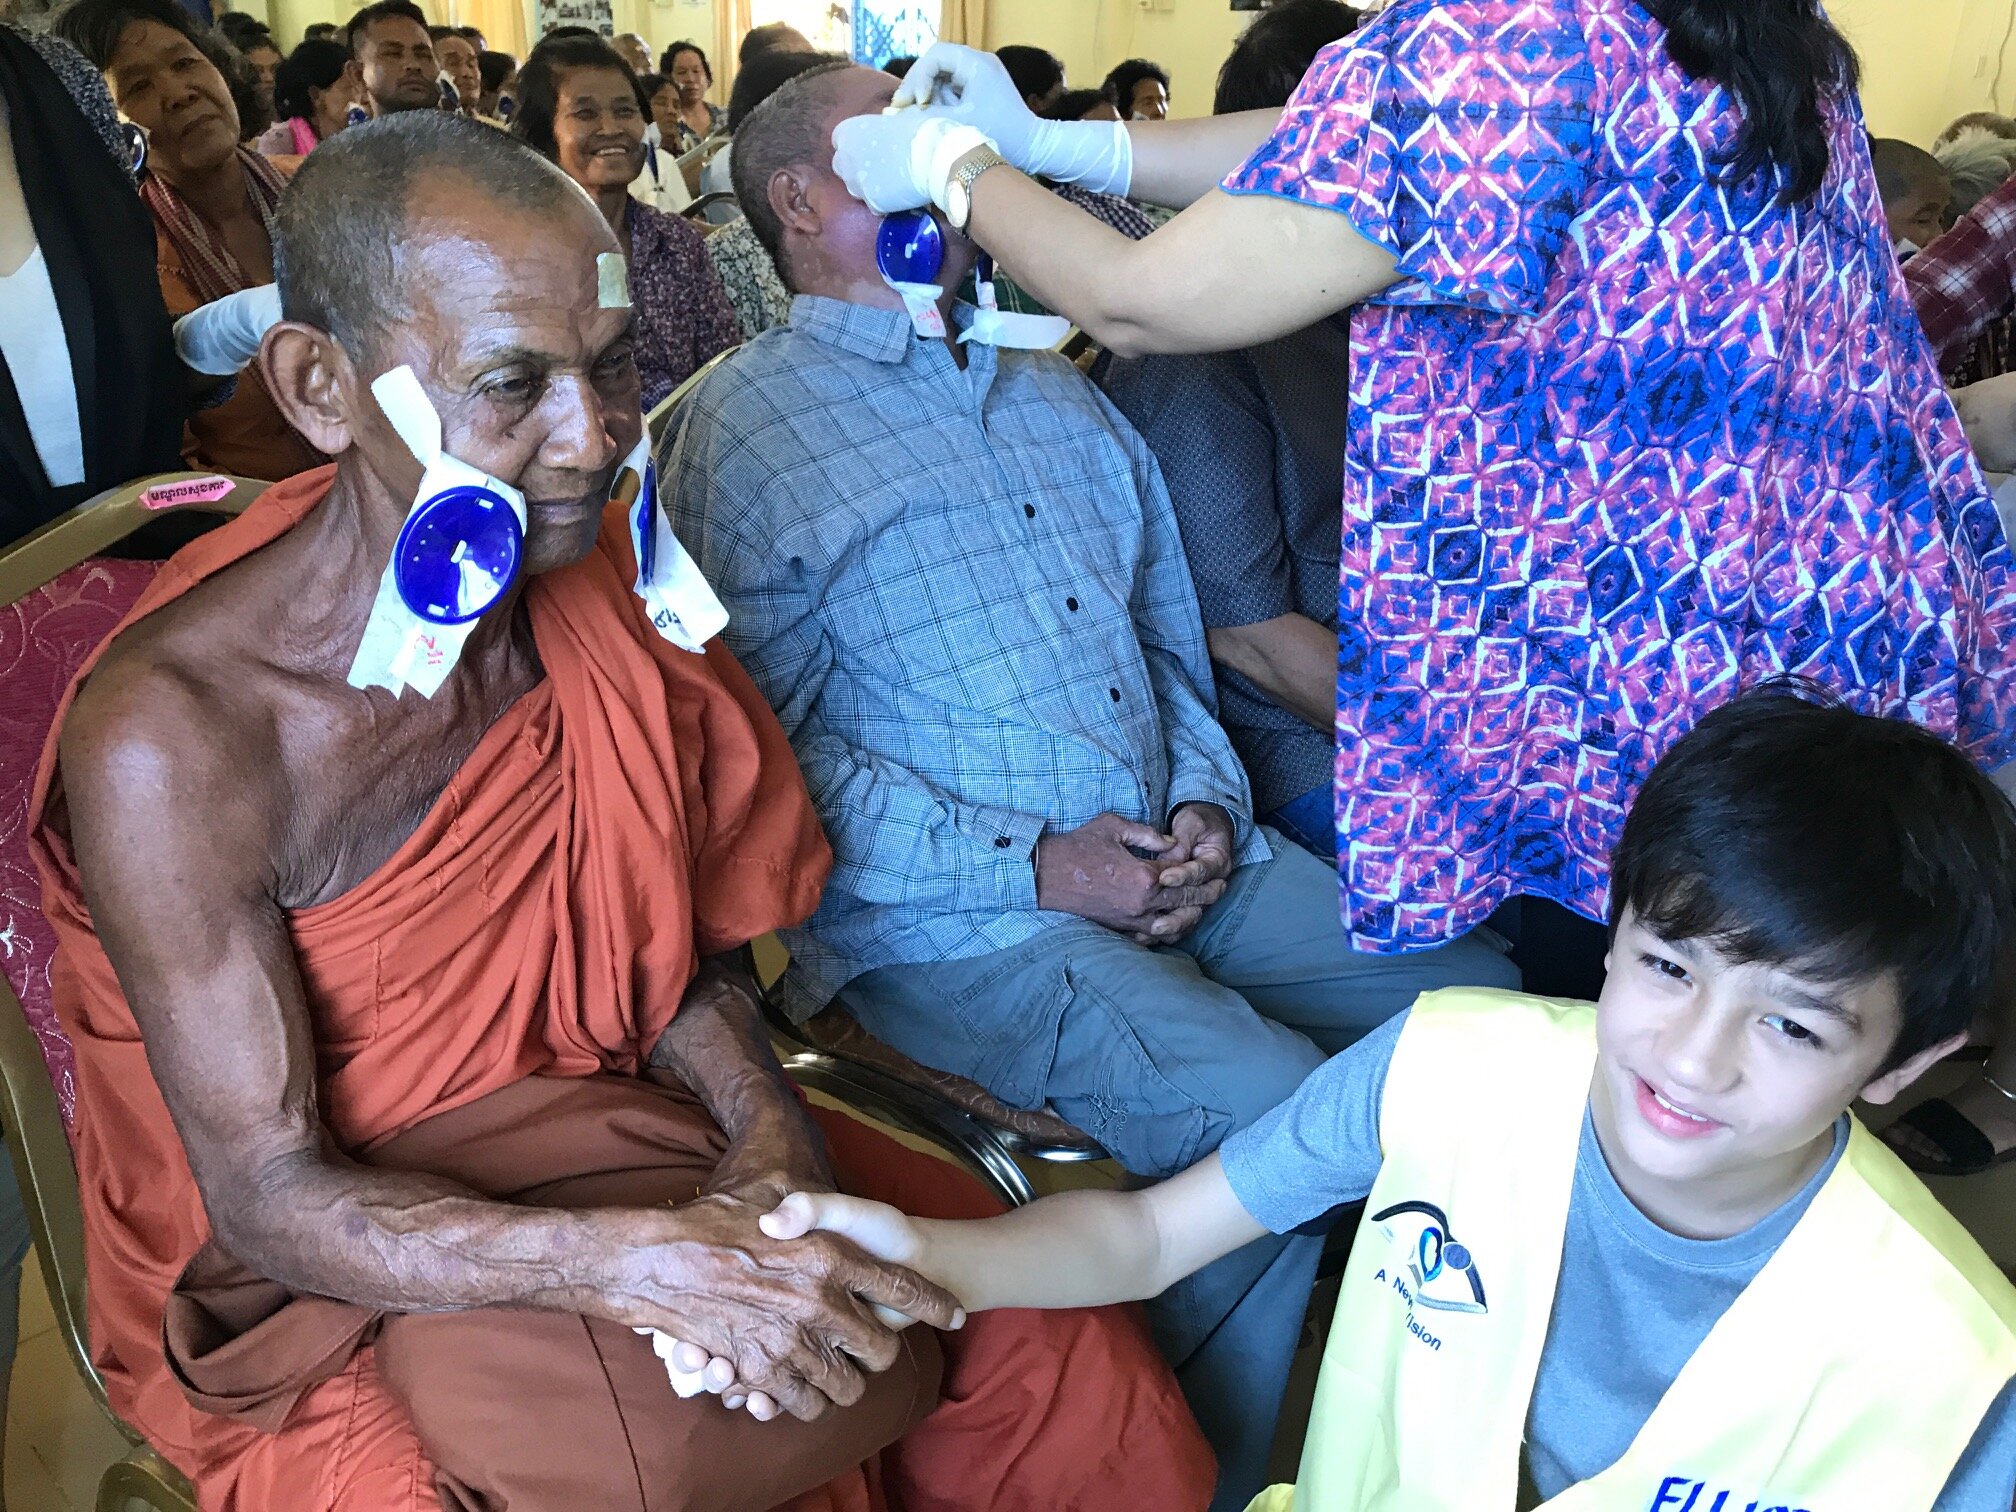 WAH Cambodia Cataract Mission with Ambasador Elliott and Monk patient.JPG